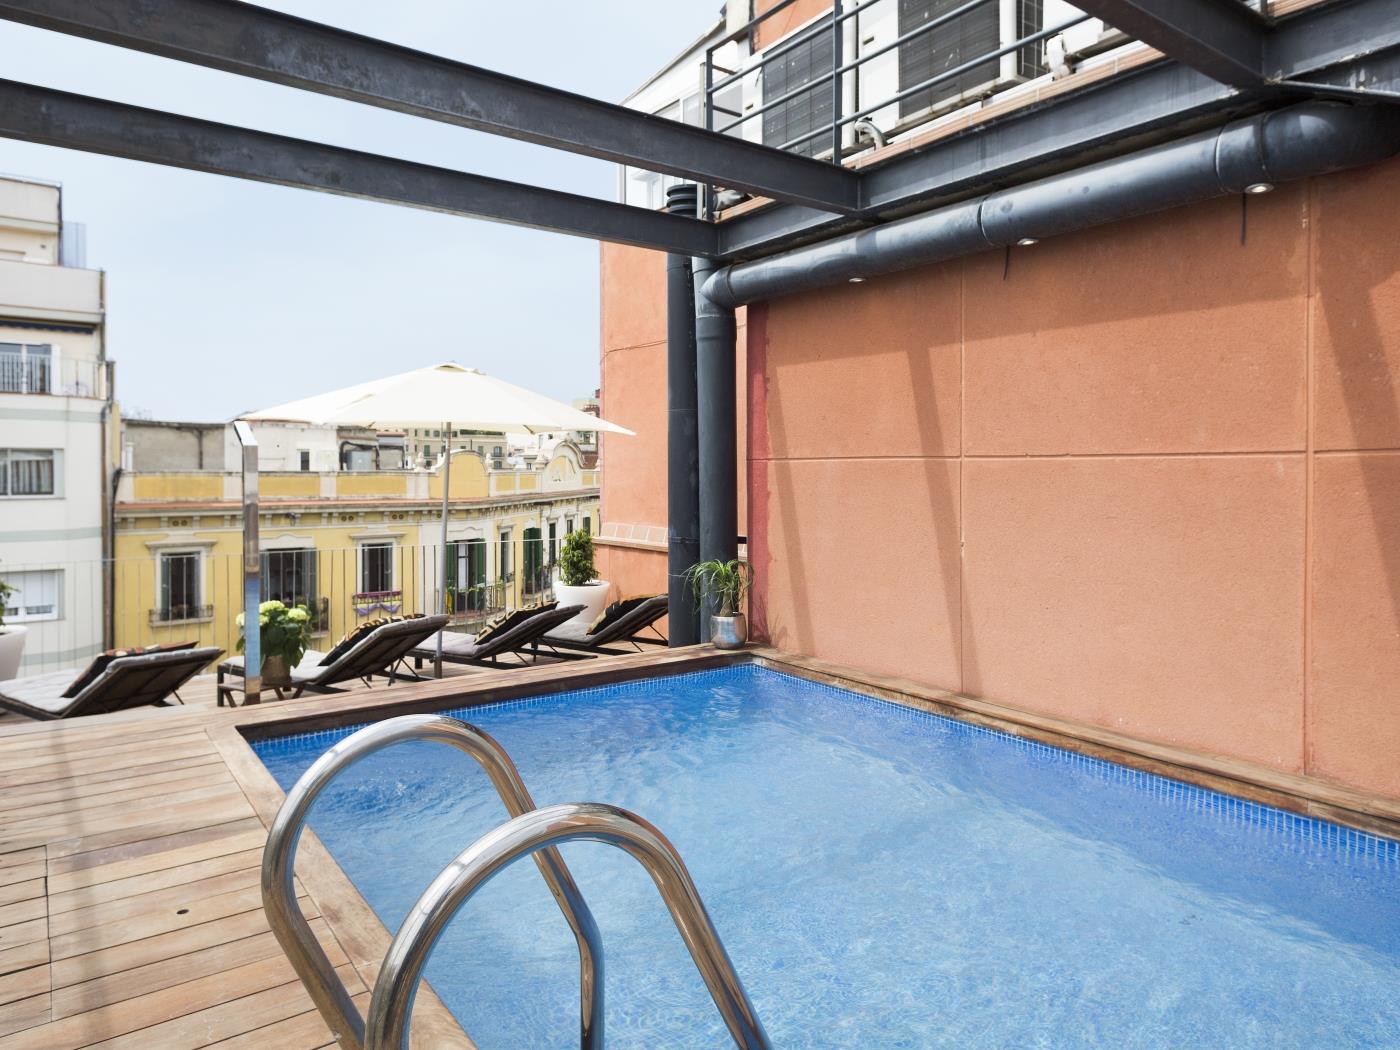 Barcelona Apartment Arc de Triomf with Pool - My Space Barcelona Aпартаменты